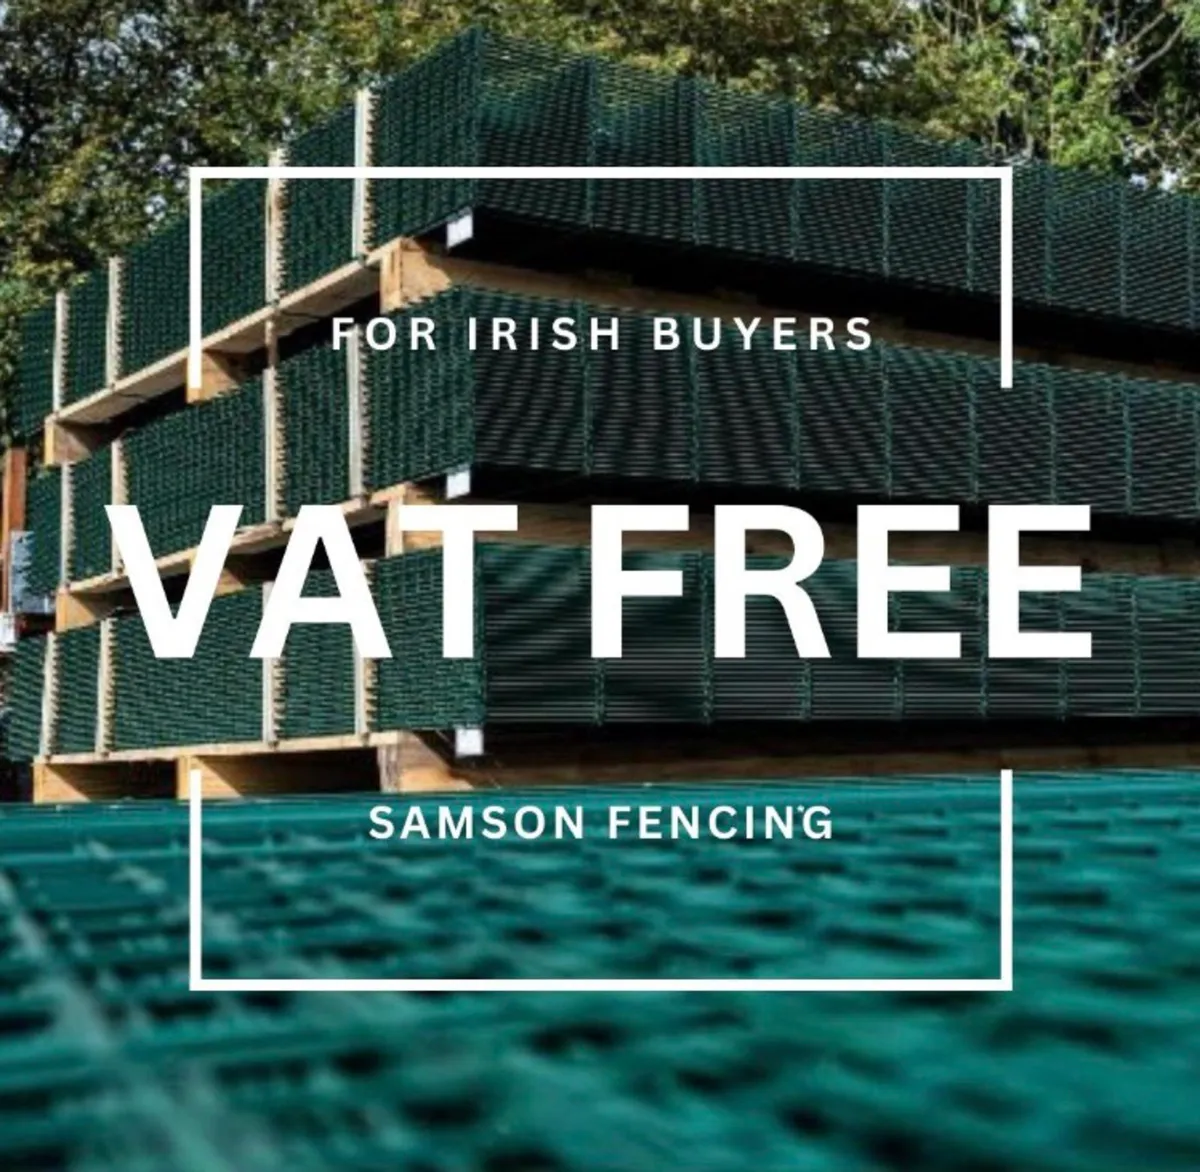 DISCOUNT FENCING..No Vat for Irish buyers- save - Image 1